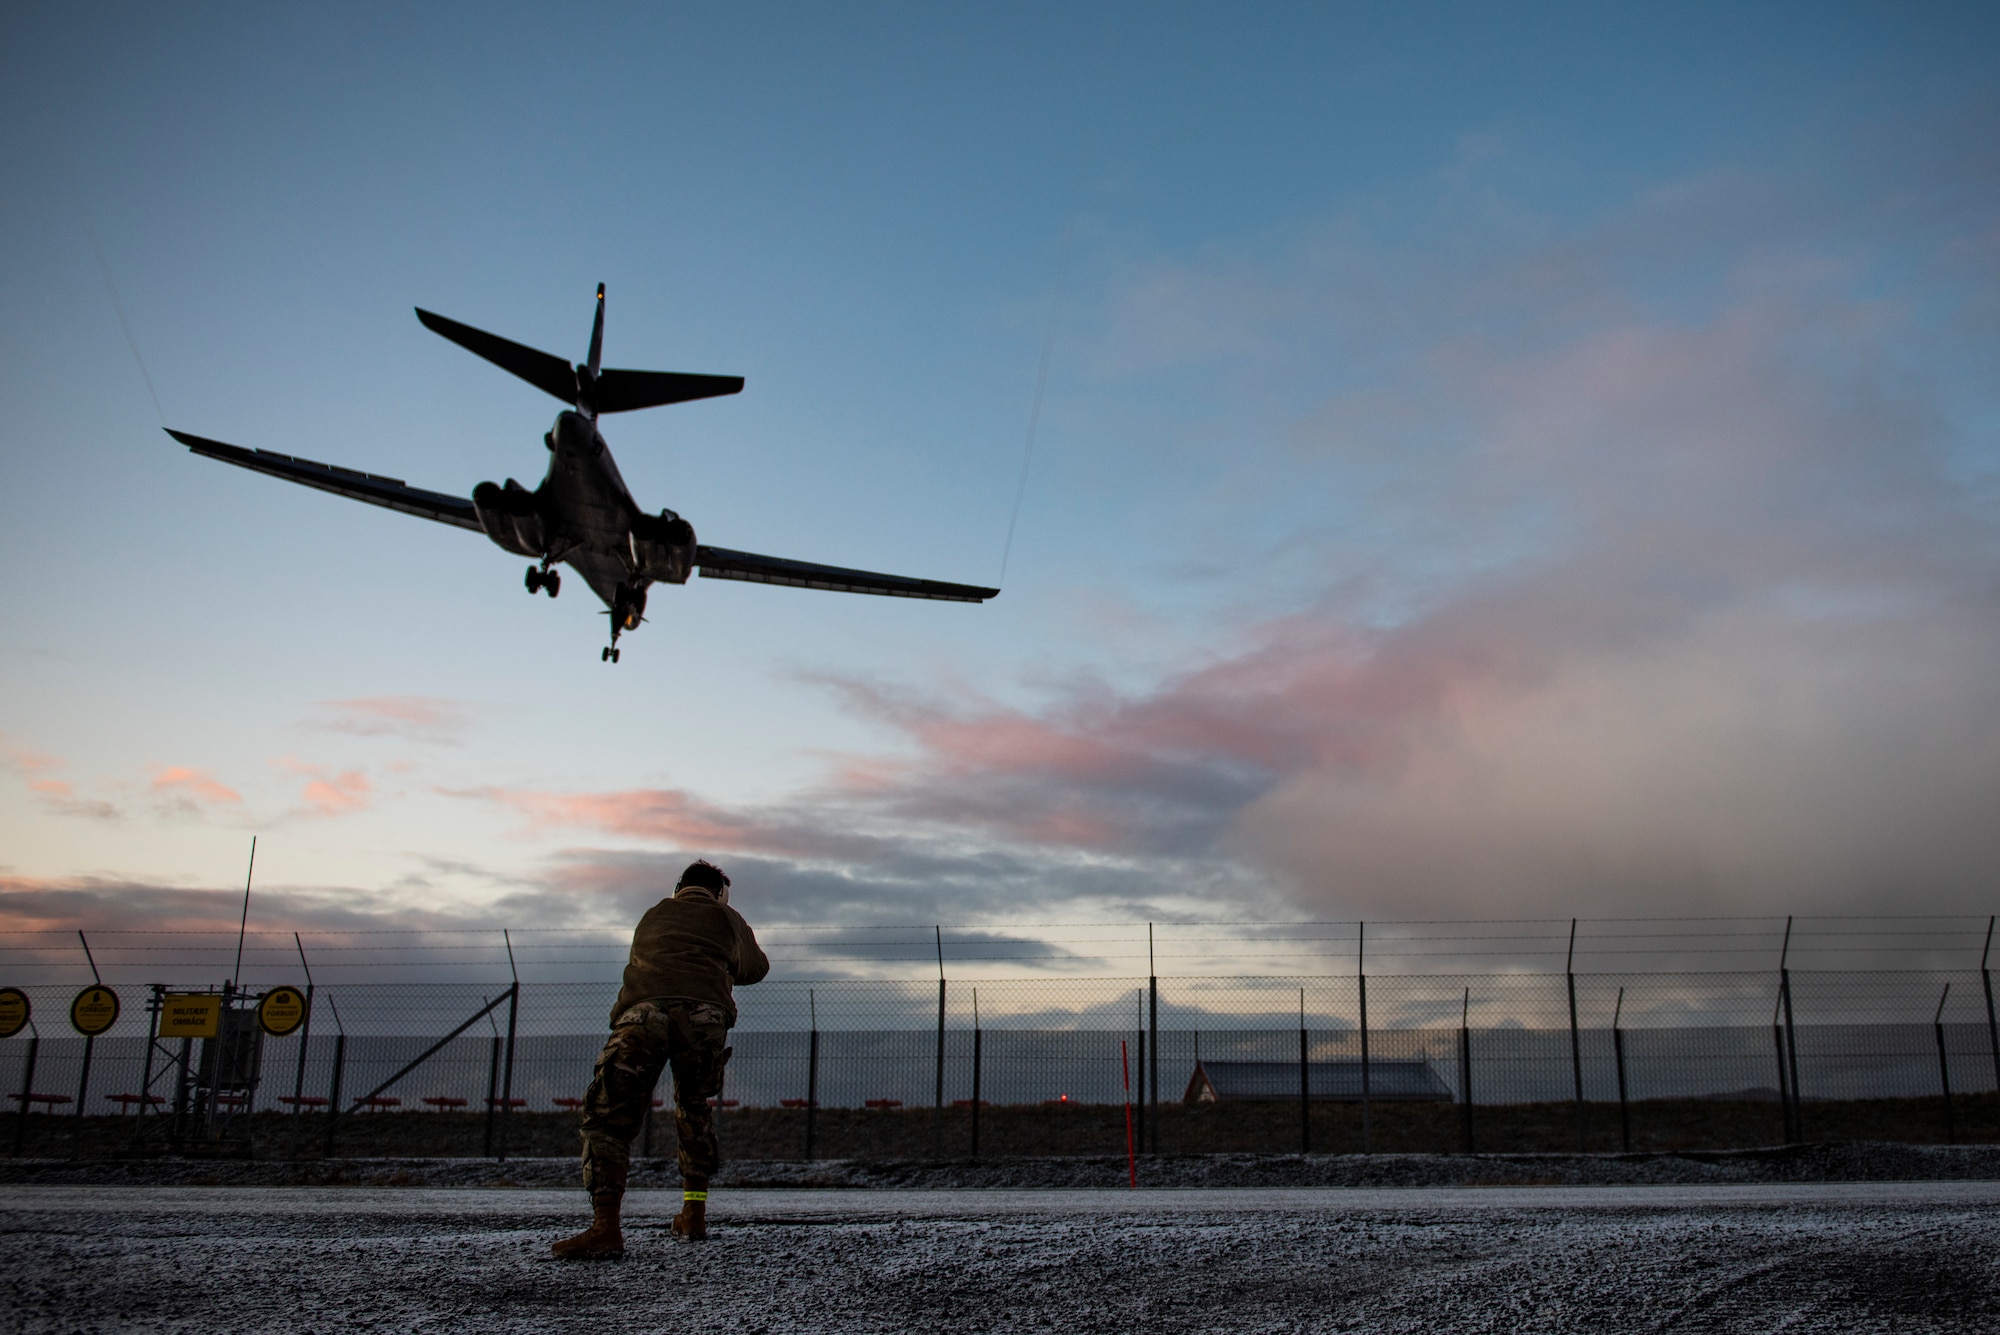 A 9th Expeditionary Bomb Squadron public affairs specialist documents a B-1B Lancer landing at Ørland Air Force Station, Norway, March 3, 2021. Integrating with NATO allies and partners enhances interoperability while also improving command and control mechanisms. (U.S. Air Force photo by Airman 1st Class Colin Hollowell)